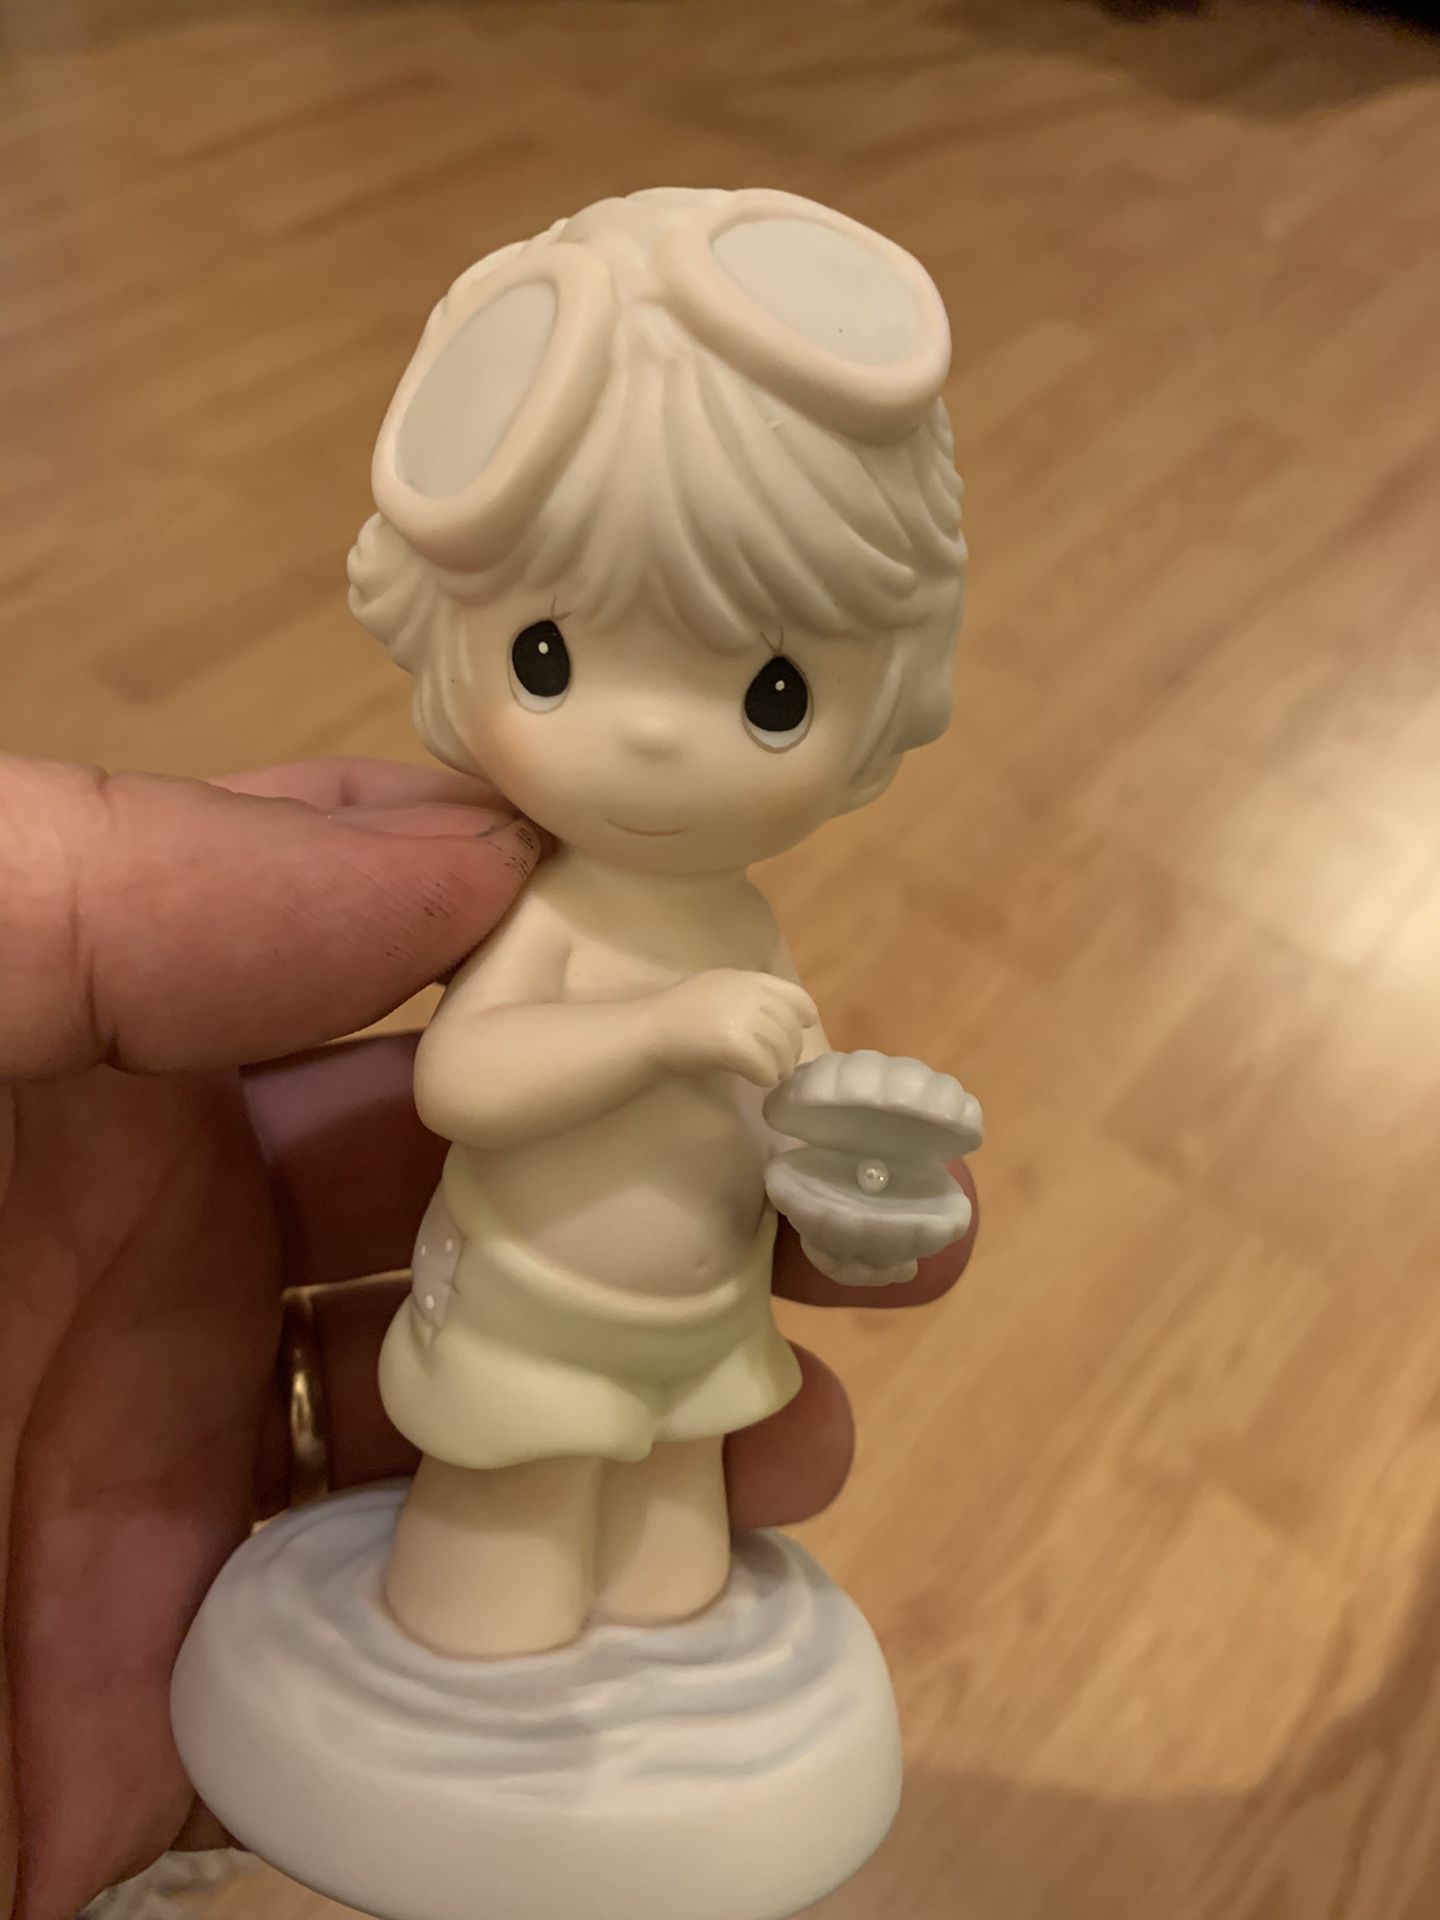 Precious Moments “There is no Greater Treasure Than to Have a Friend Like You” figurine